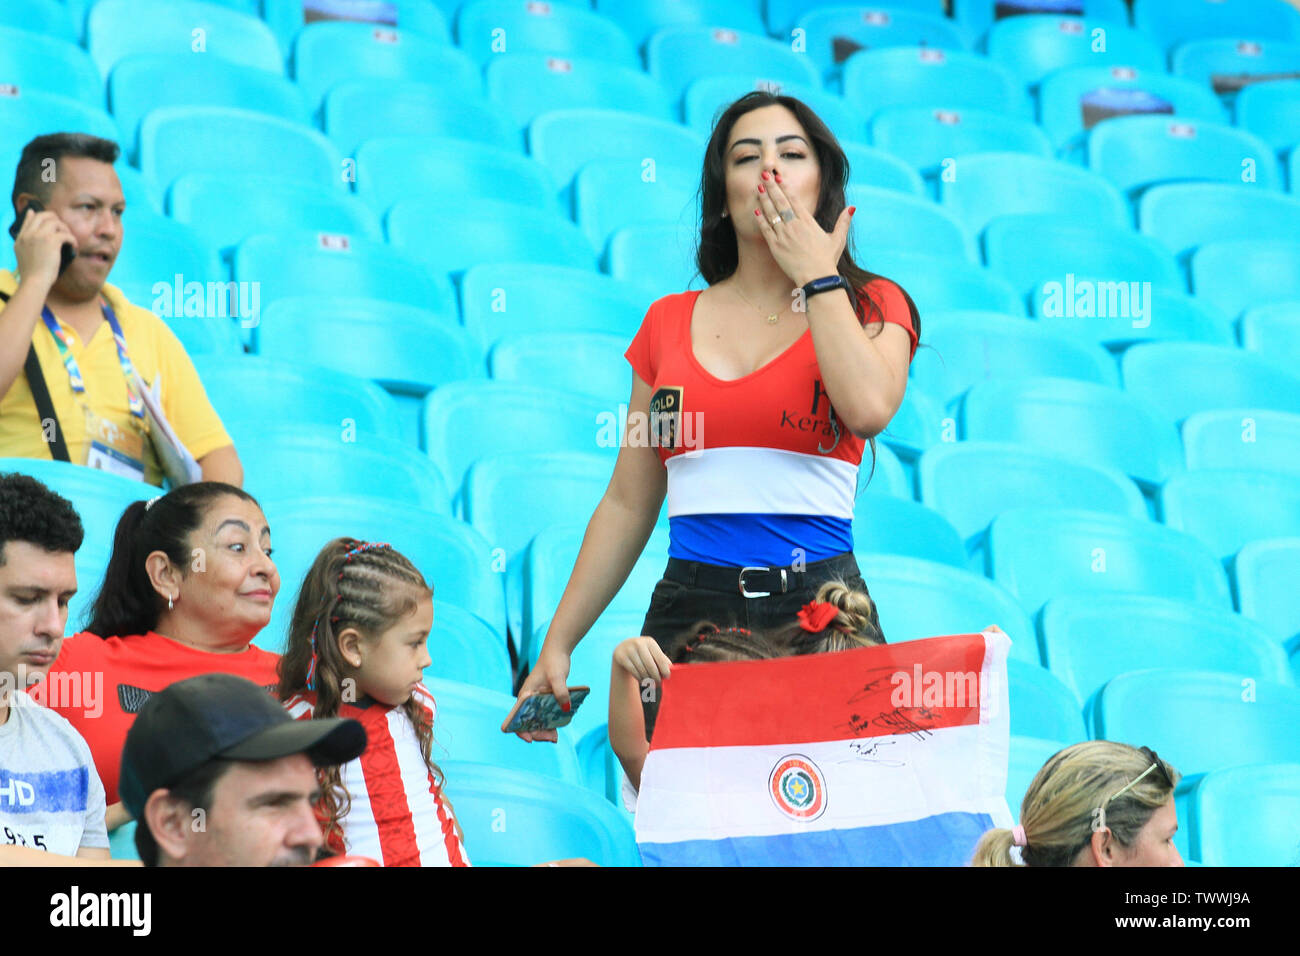 Salvador, Brazil. 23rd June, 2019. Larissa Riquelme in Paraguay&#39;s squad during a match between Colombia and Paraguay, valid for the group stage of the 20opa America, held this Sundaunday (23) at the Fonte Nova Arena in Salvador, BA. Credit: Mauro Akiin Nassor/FotoArena/Alamy Live News Stock Photo